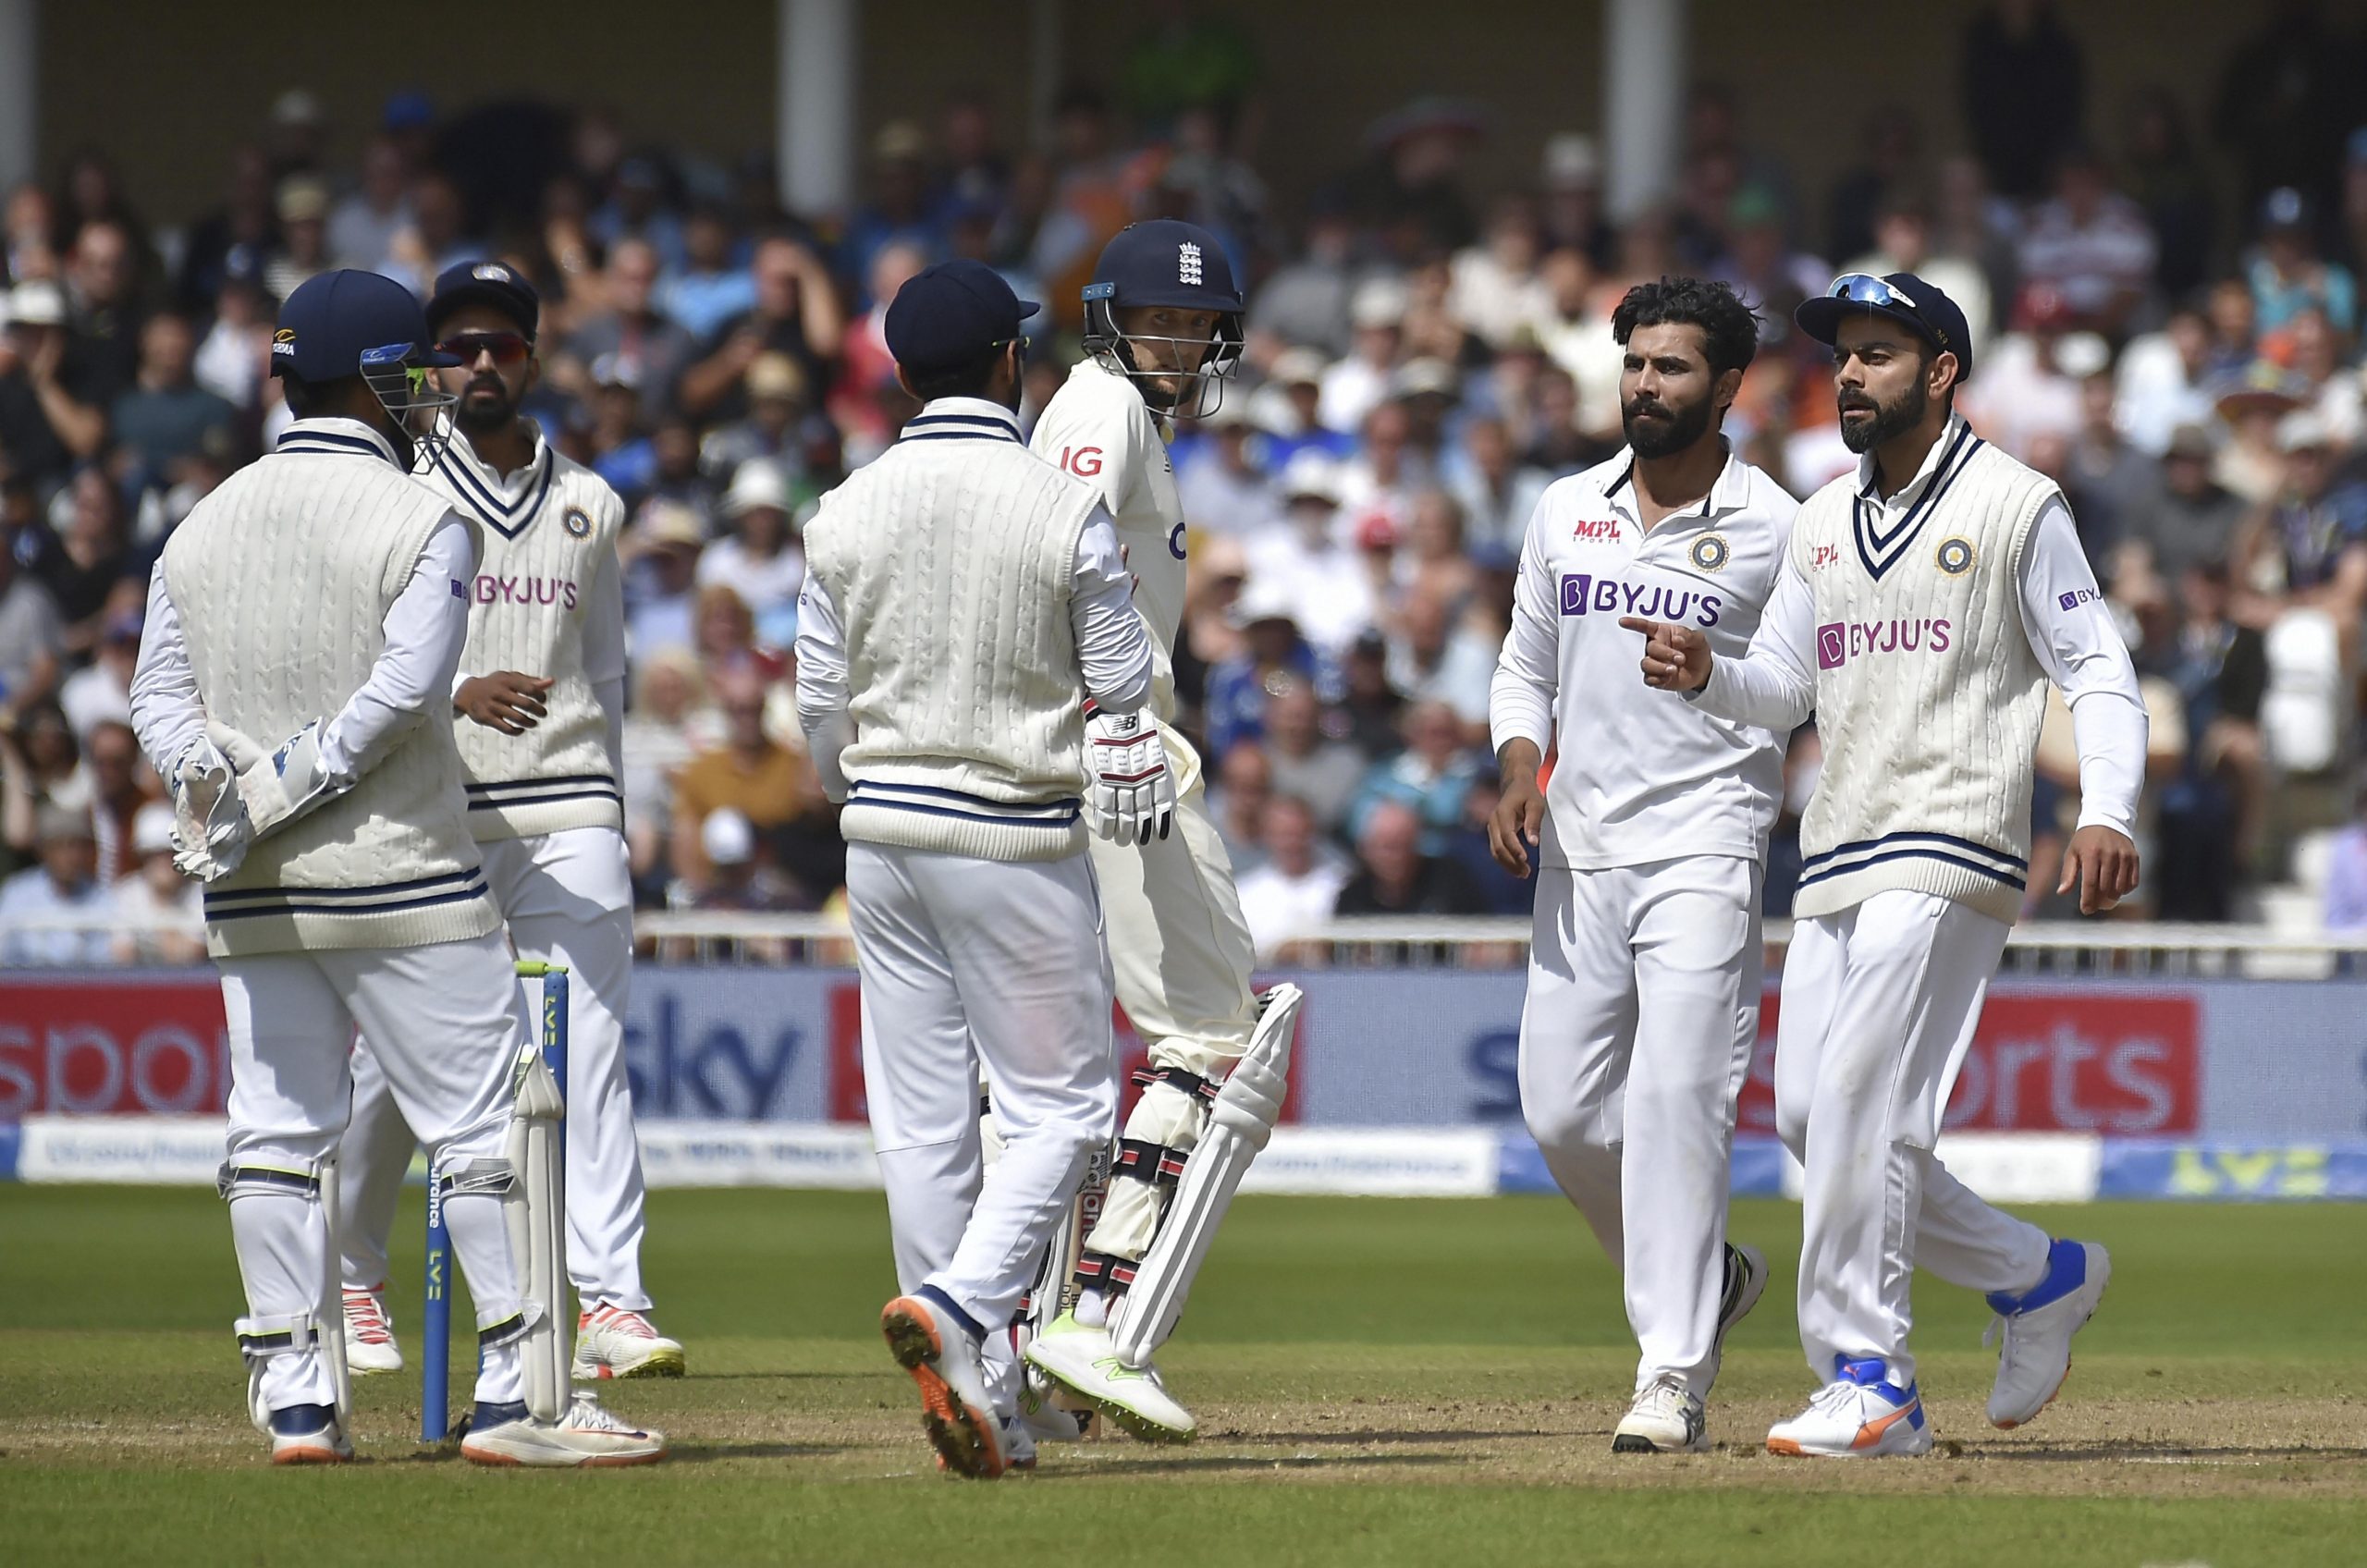 2nd Test: India look to improve batting performance against England at Lord’s